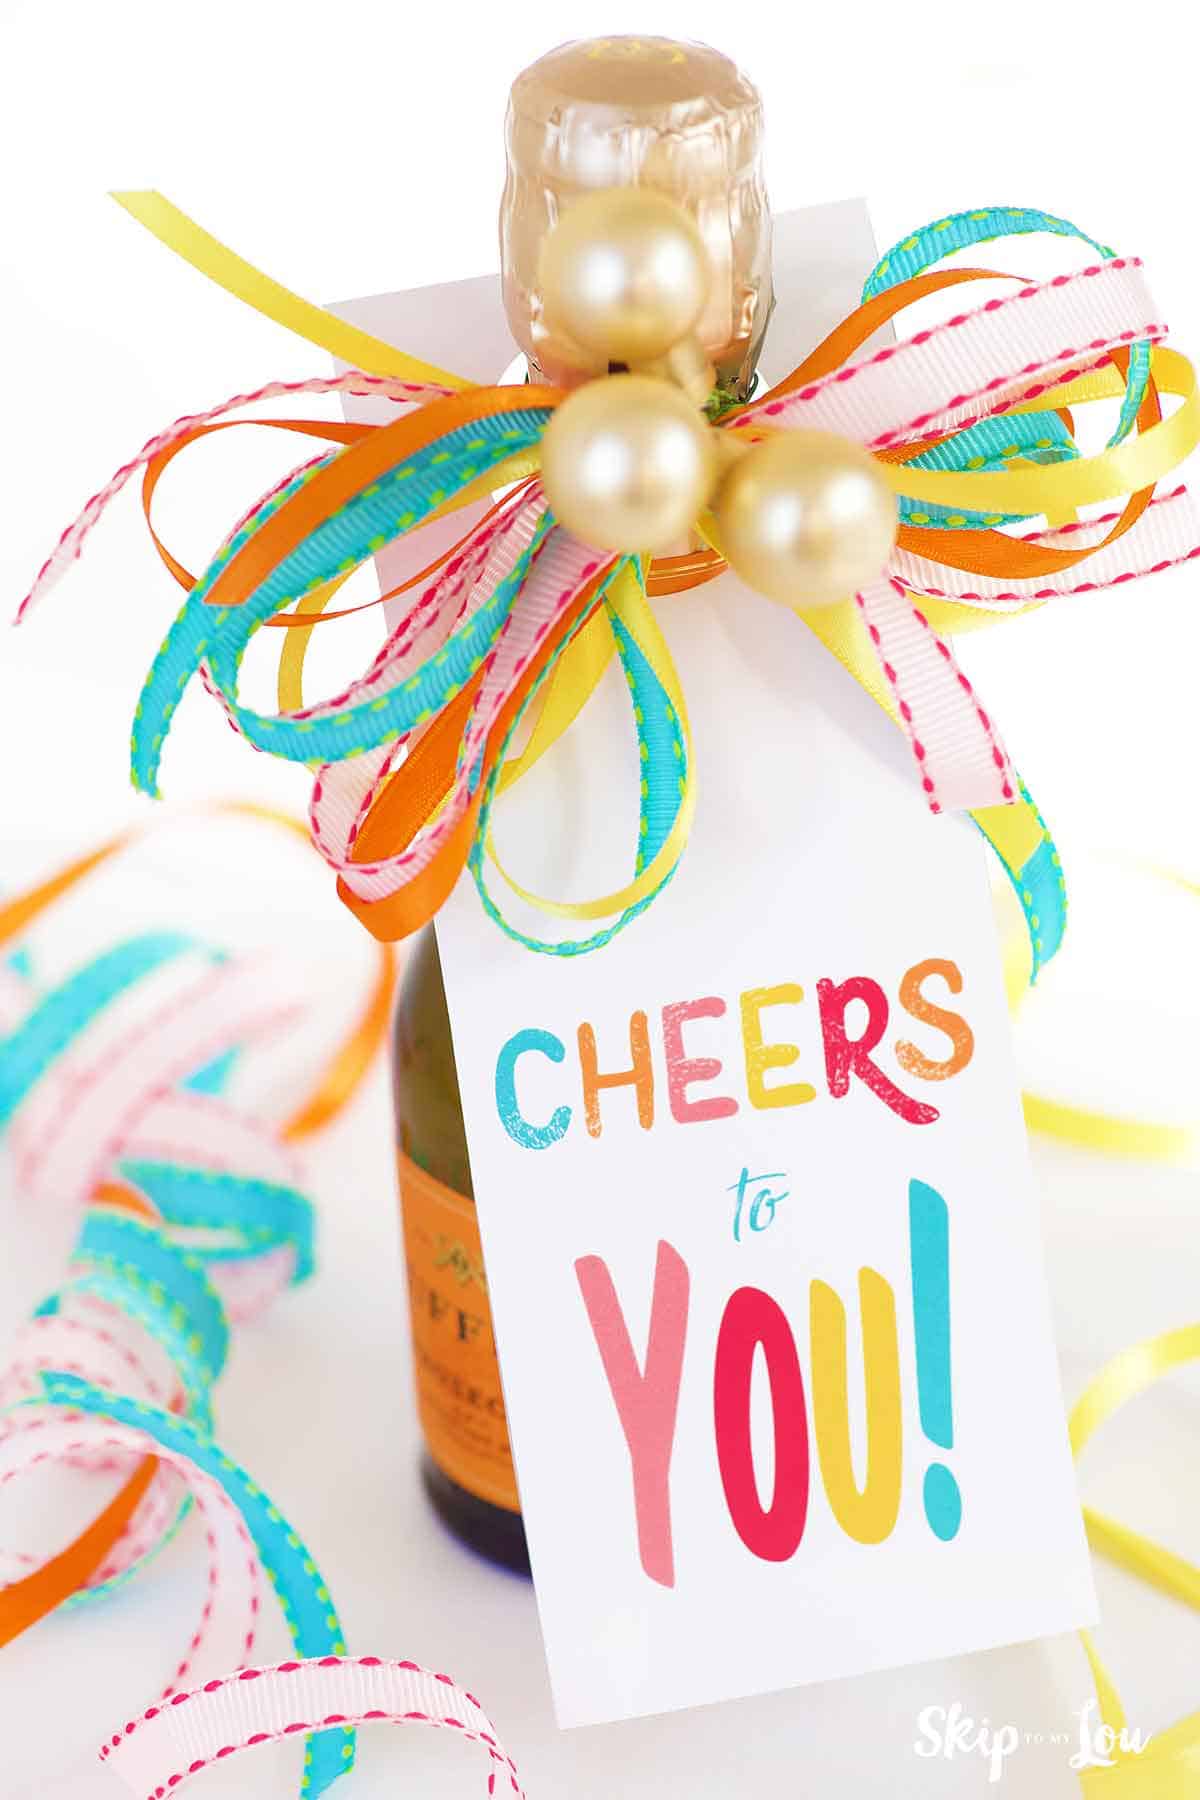 Image shows a wine with a gift tag that says "Cheers to you!" - Skip to my Lou